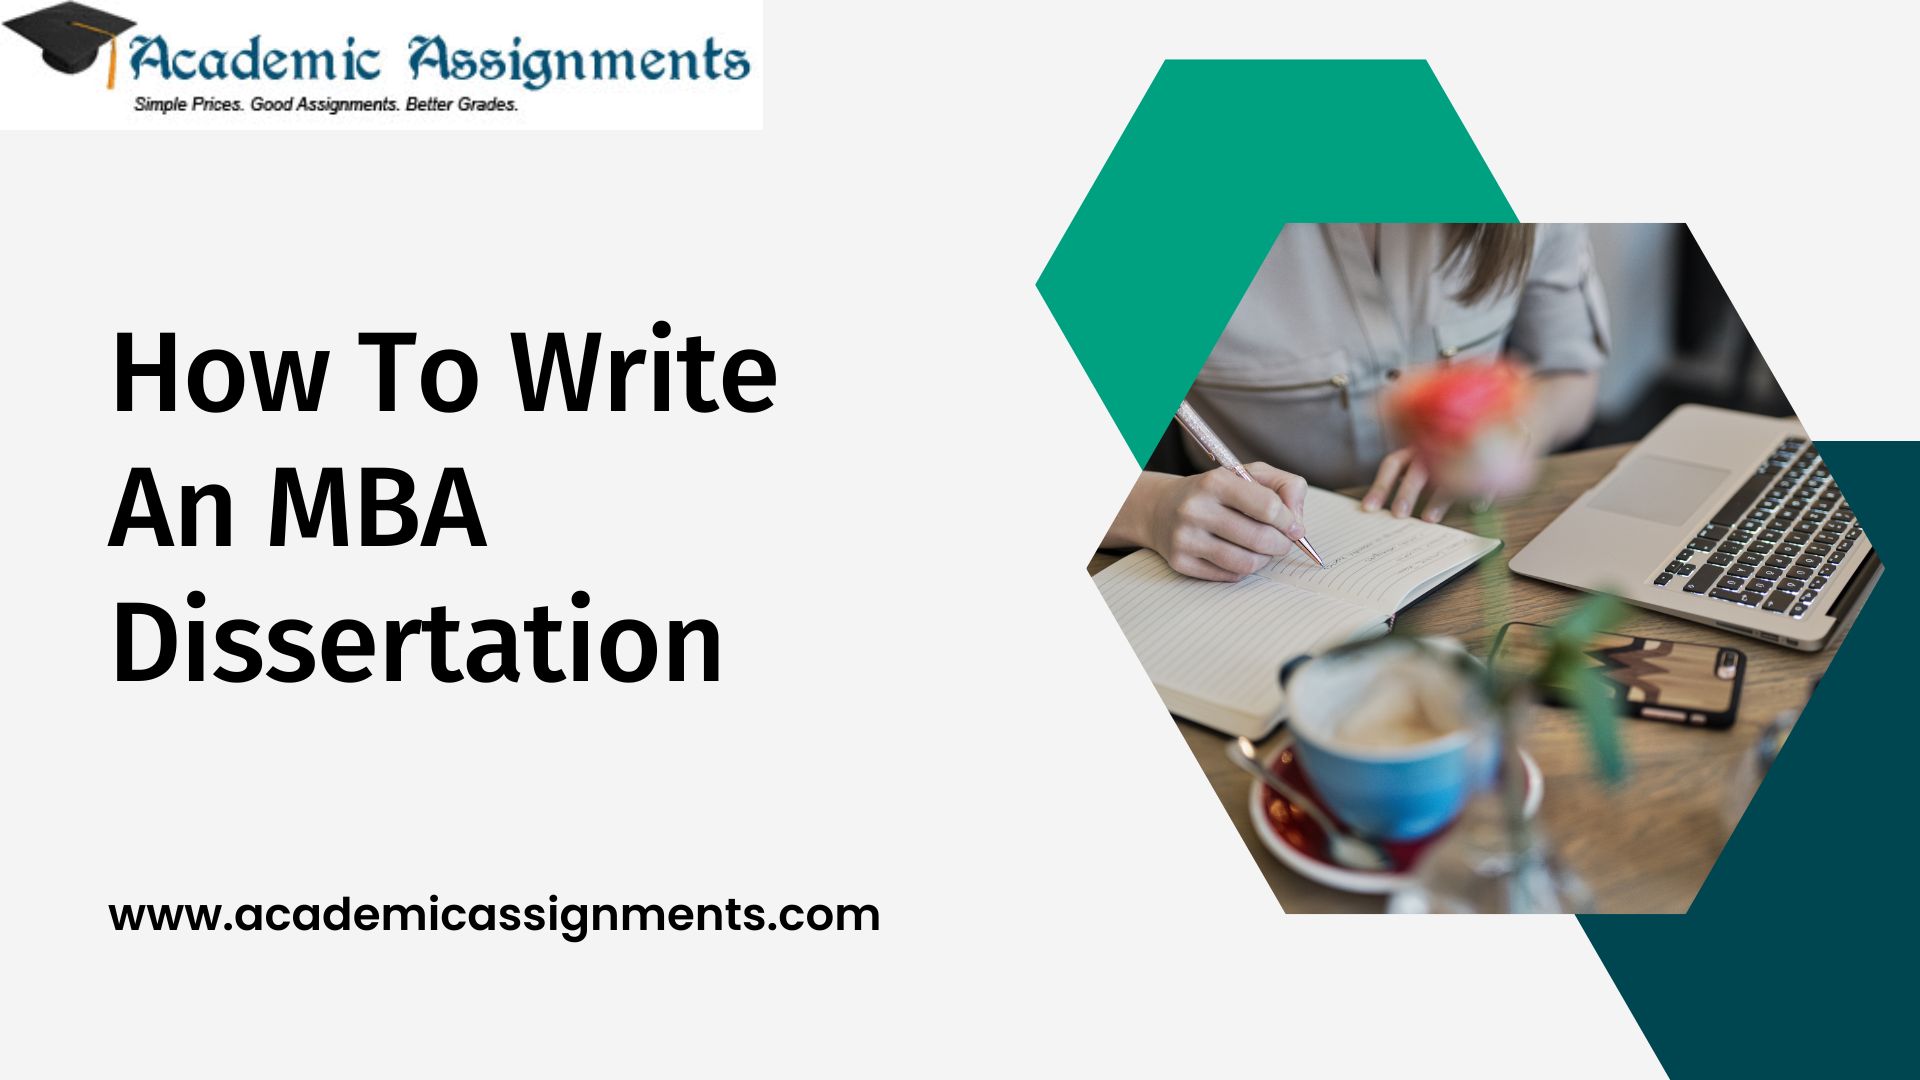 How To Write An MBA Dissertation